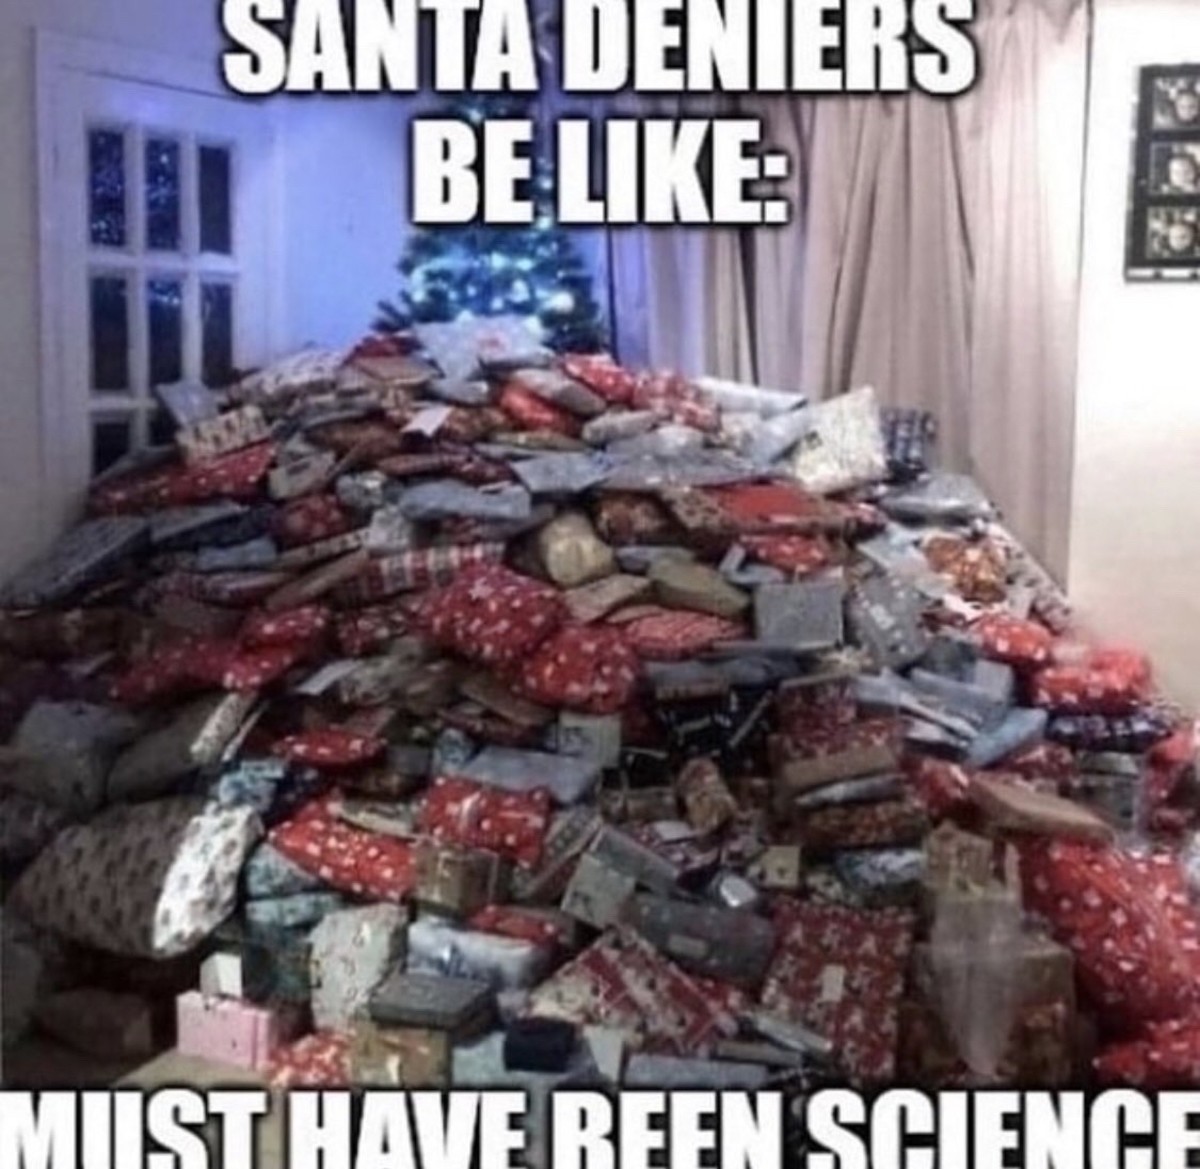 subjective s. .. Hey atheists, If Santa isn't real, what's preventing me from doing something so depraved and egregious that would get me on the naughty list permanently?Comment